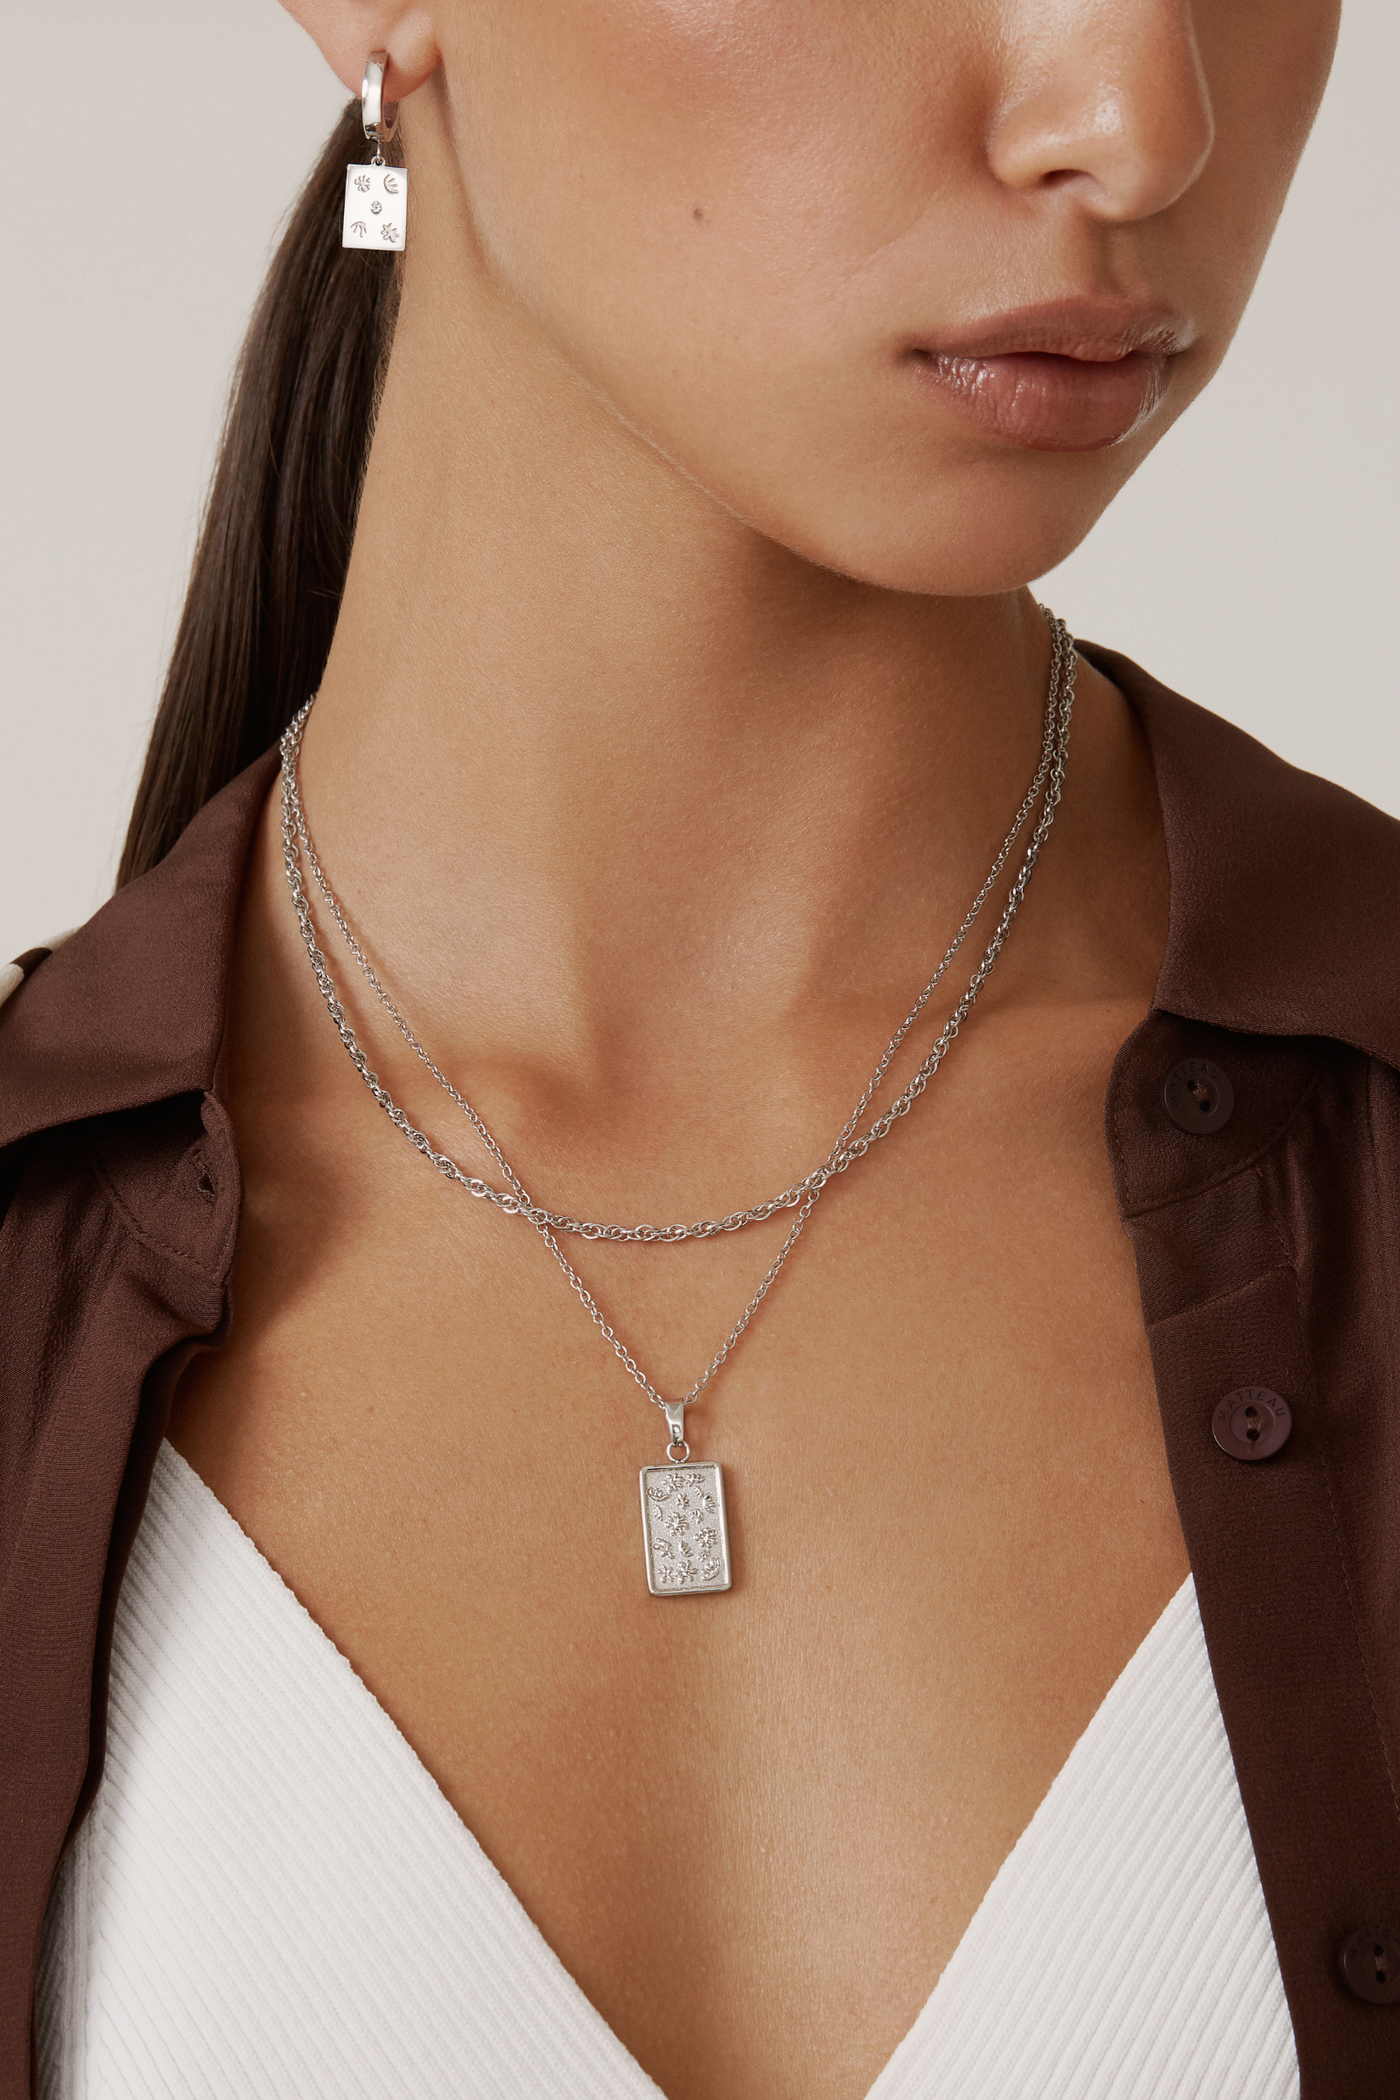 Work of Art Necklace - Silver